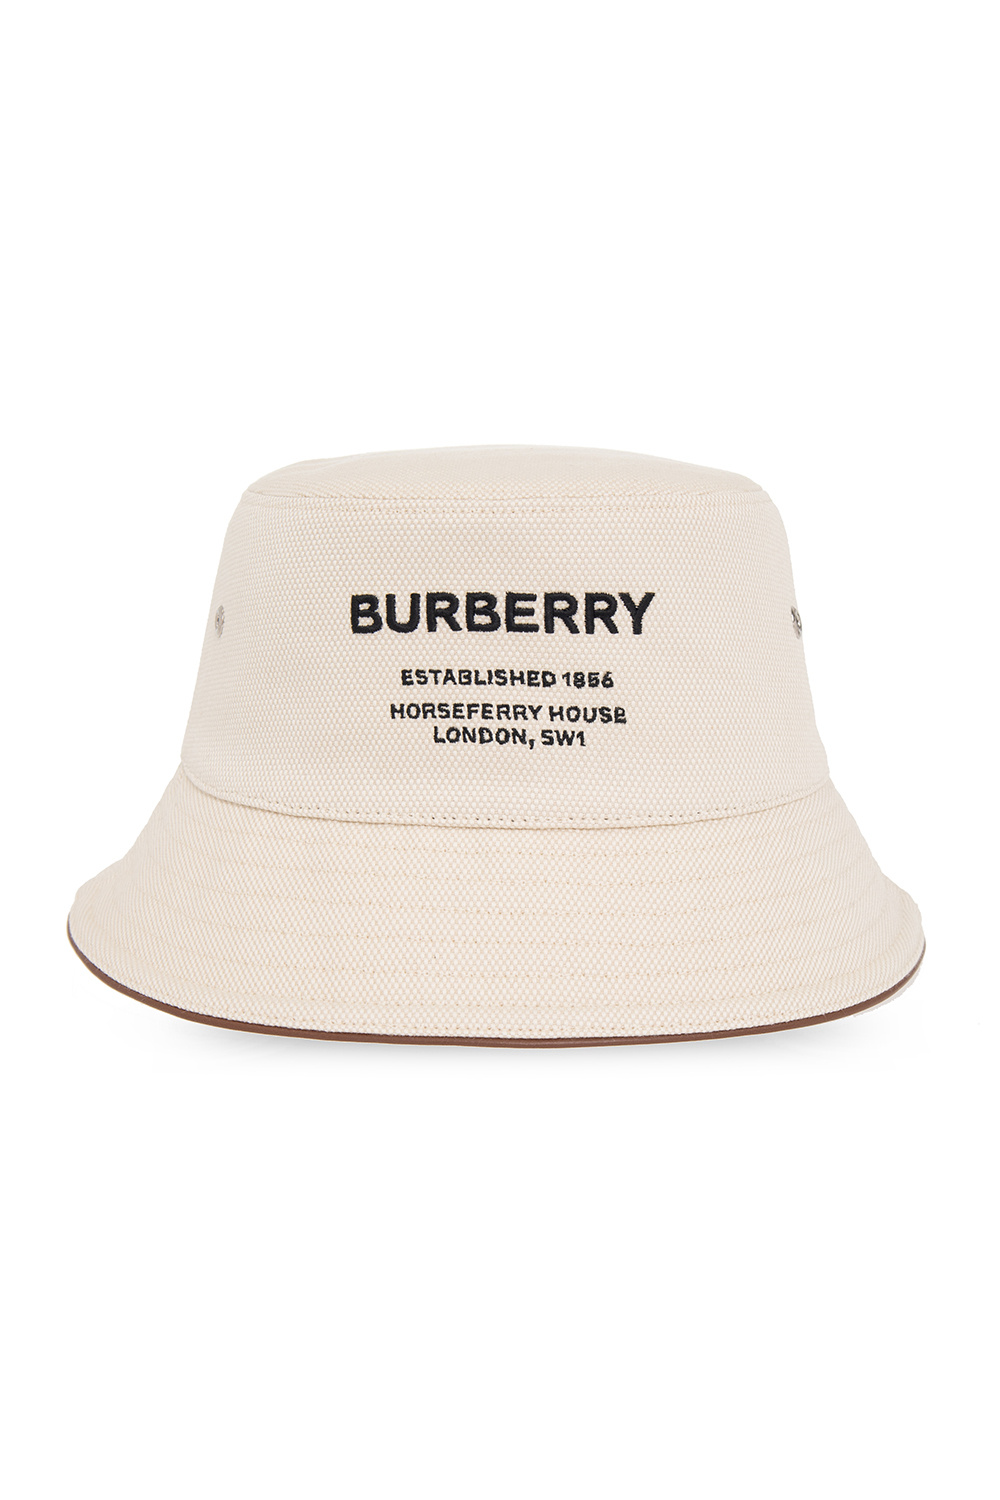 At håndtere risiko Merchandising Bucket hat with logo Burberry - Awake Ny X Lacoste Cap Multi - IetpShops  Spain